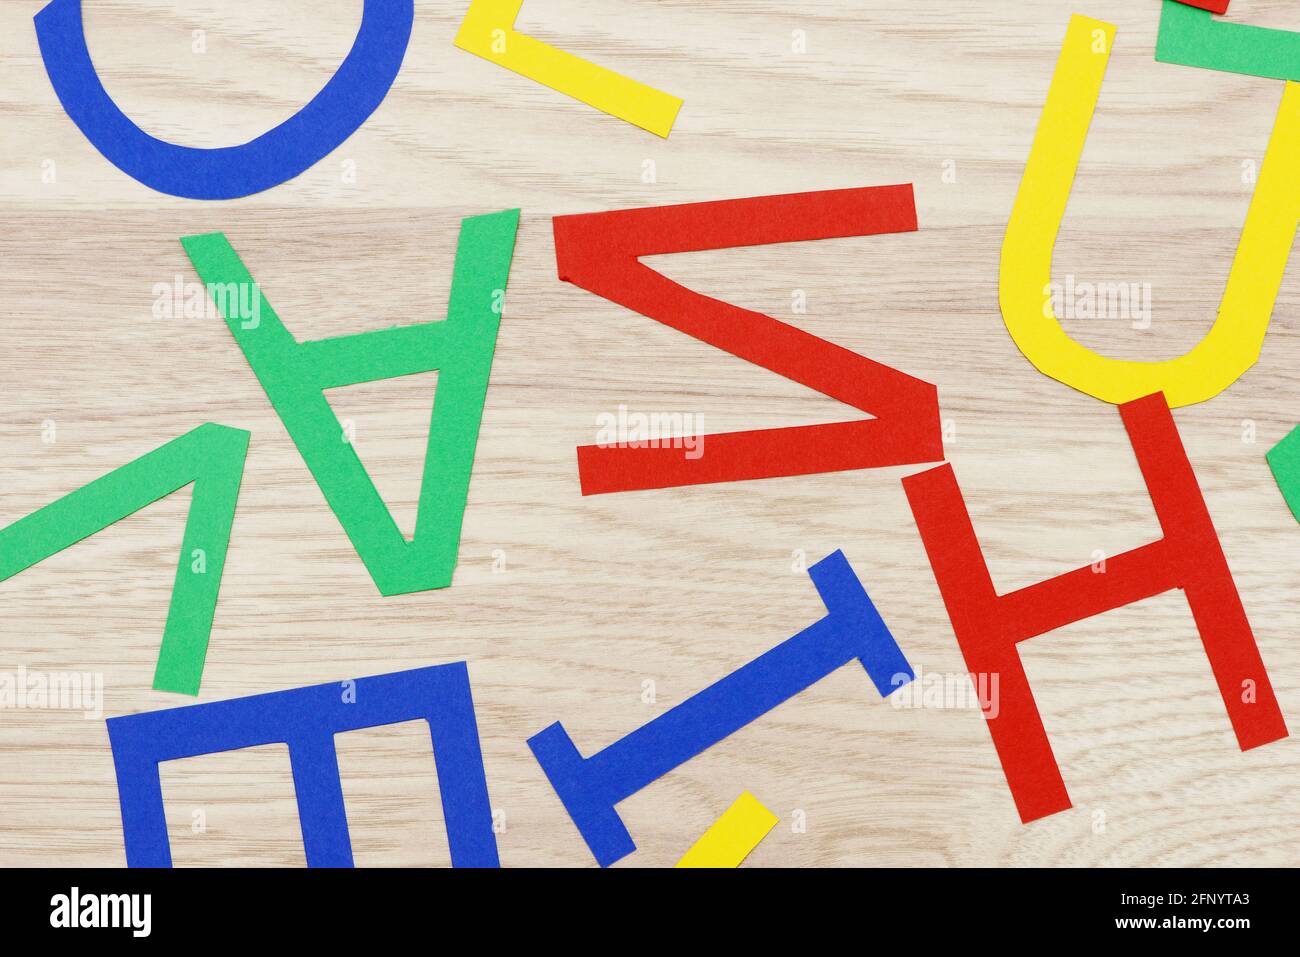 colorful jumbled letters, made of paper,  lying on wood Stock Photo